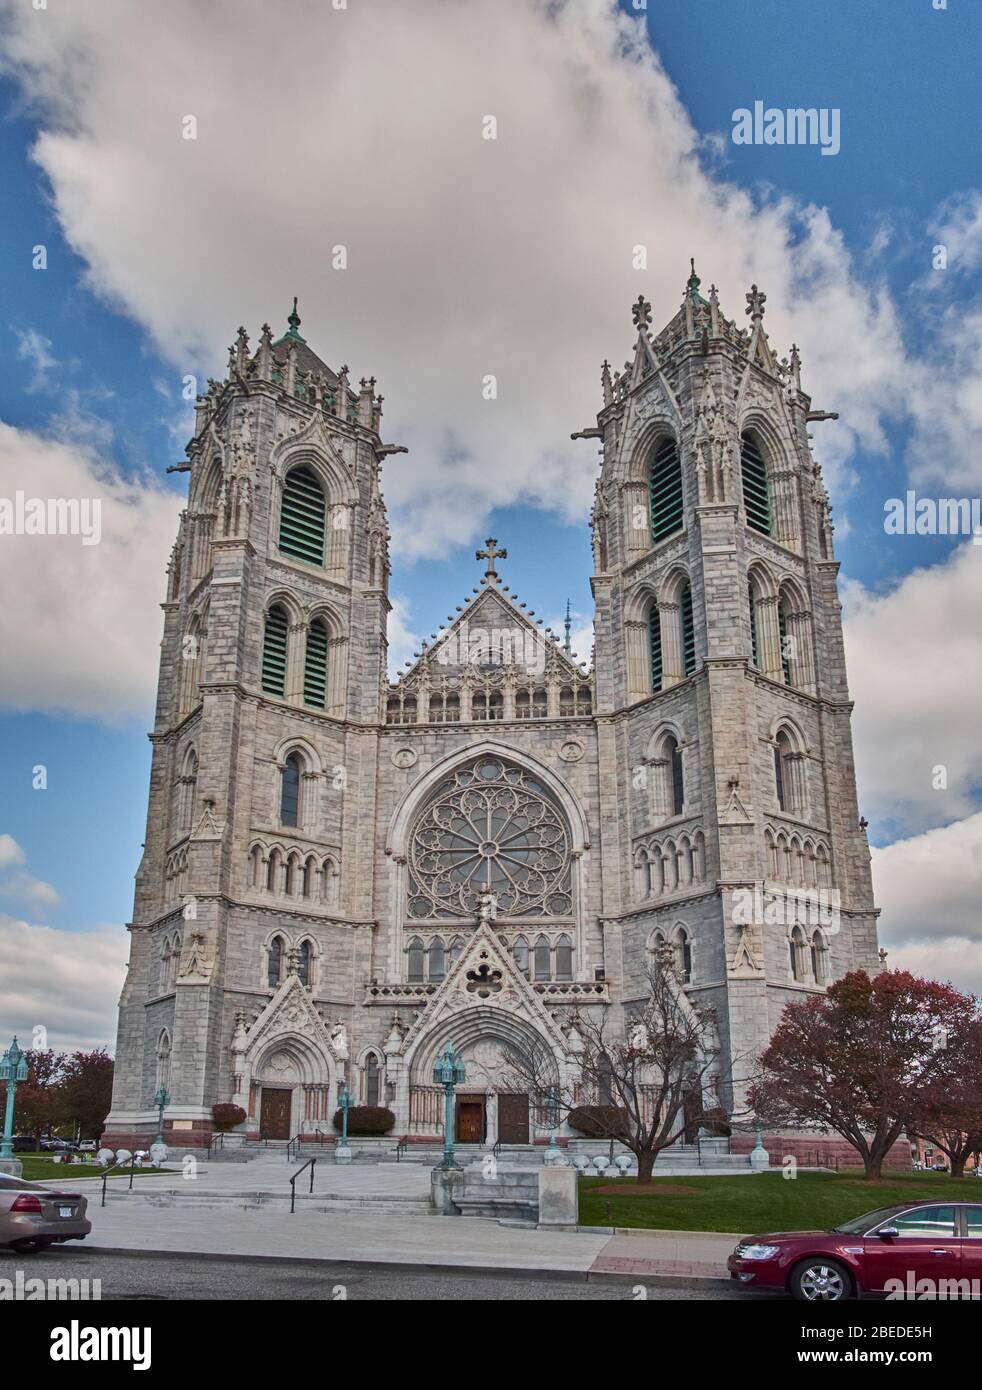 Exterior view of the Cathedral Basilica of the Sacred Heart cathedral in Newark New Jersey, USA. Photo taken in Autumn. Stock Photo